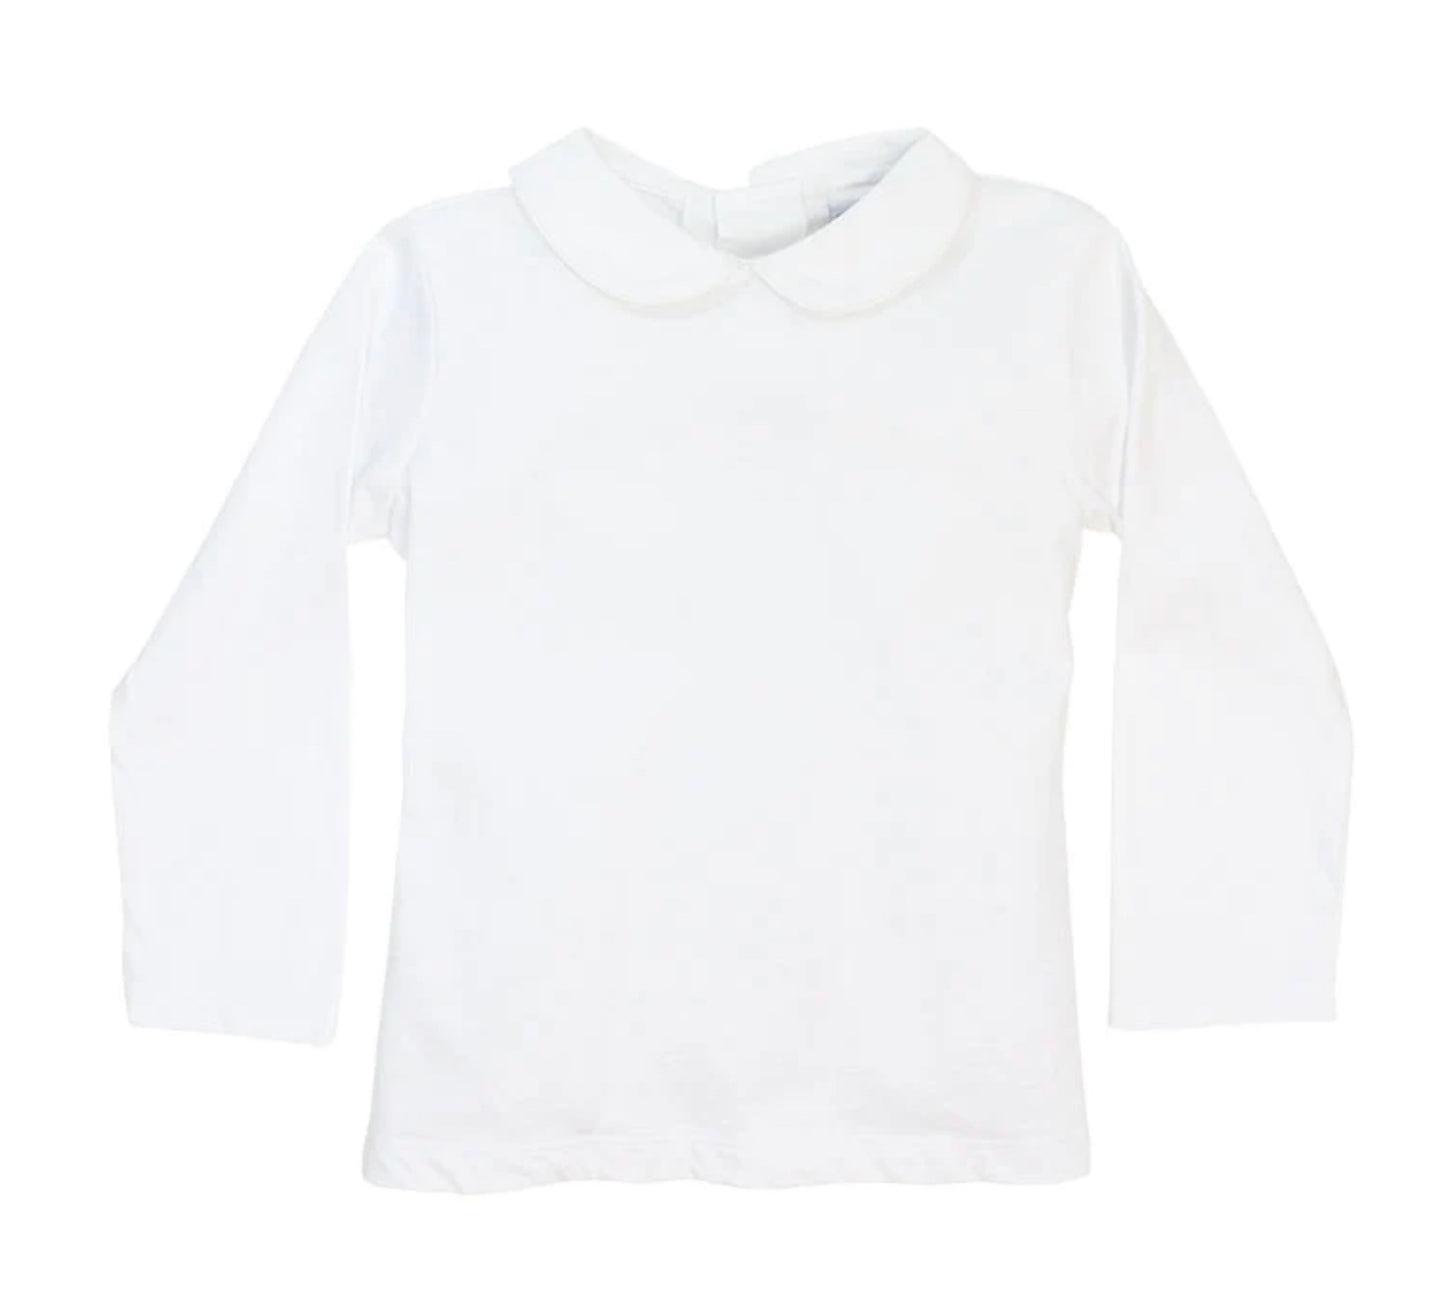 White Knit-Unisex Long Sleeve Button Back Piped Shirt